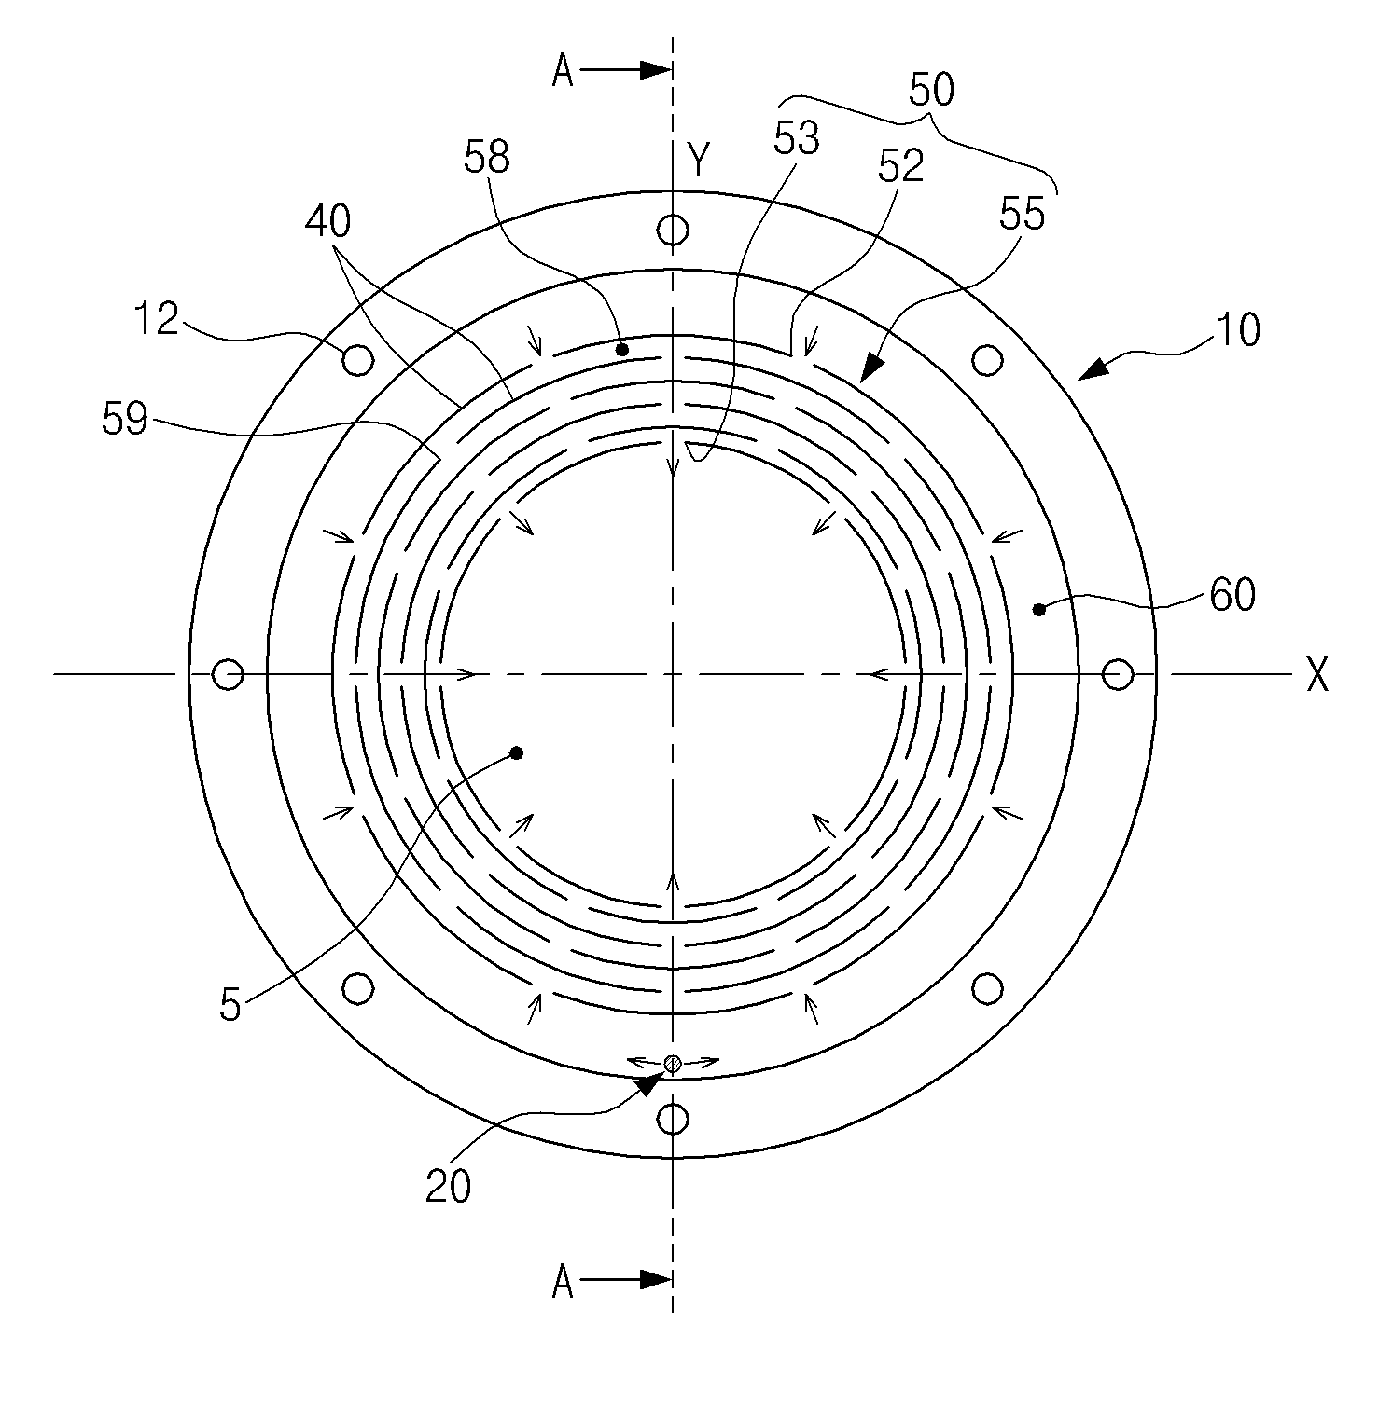 Side gas injector for plasma reaction chamber